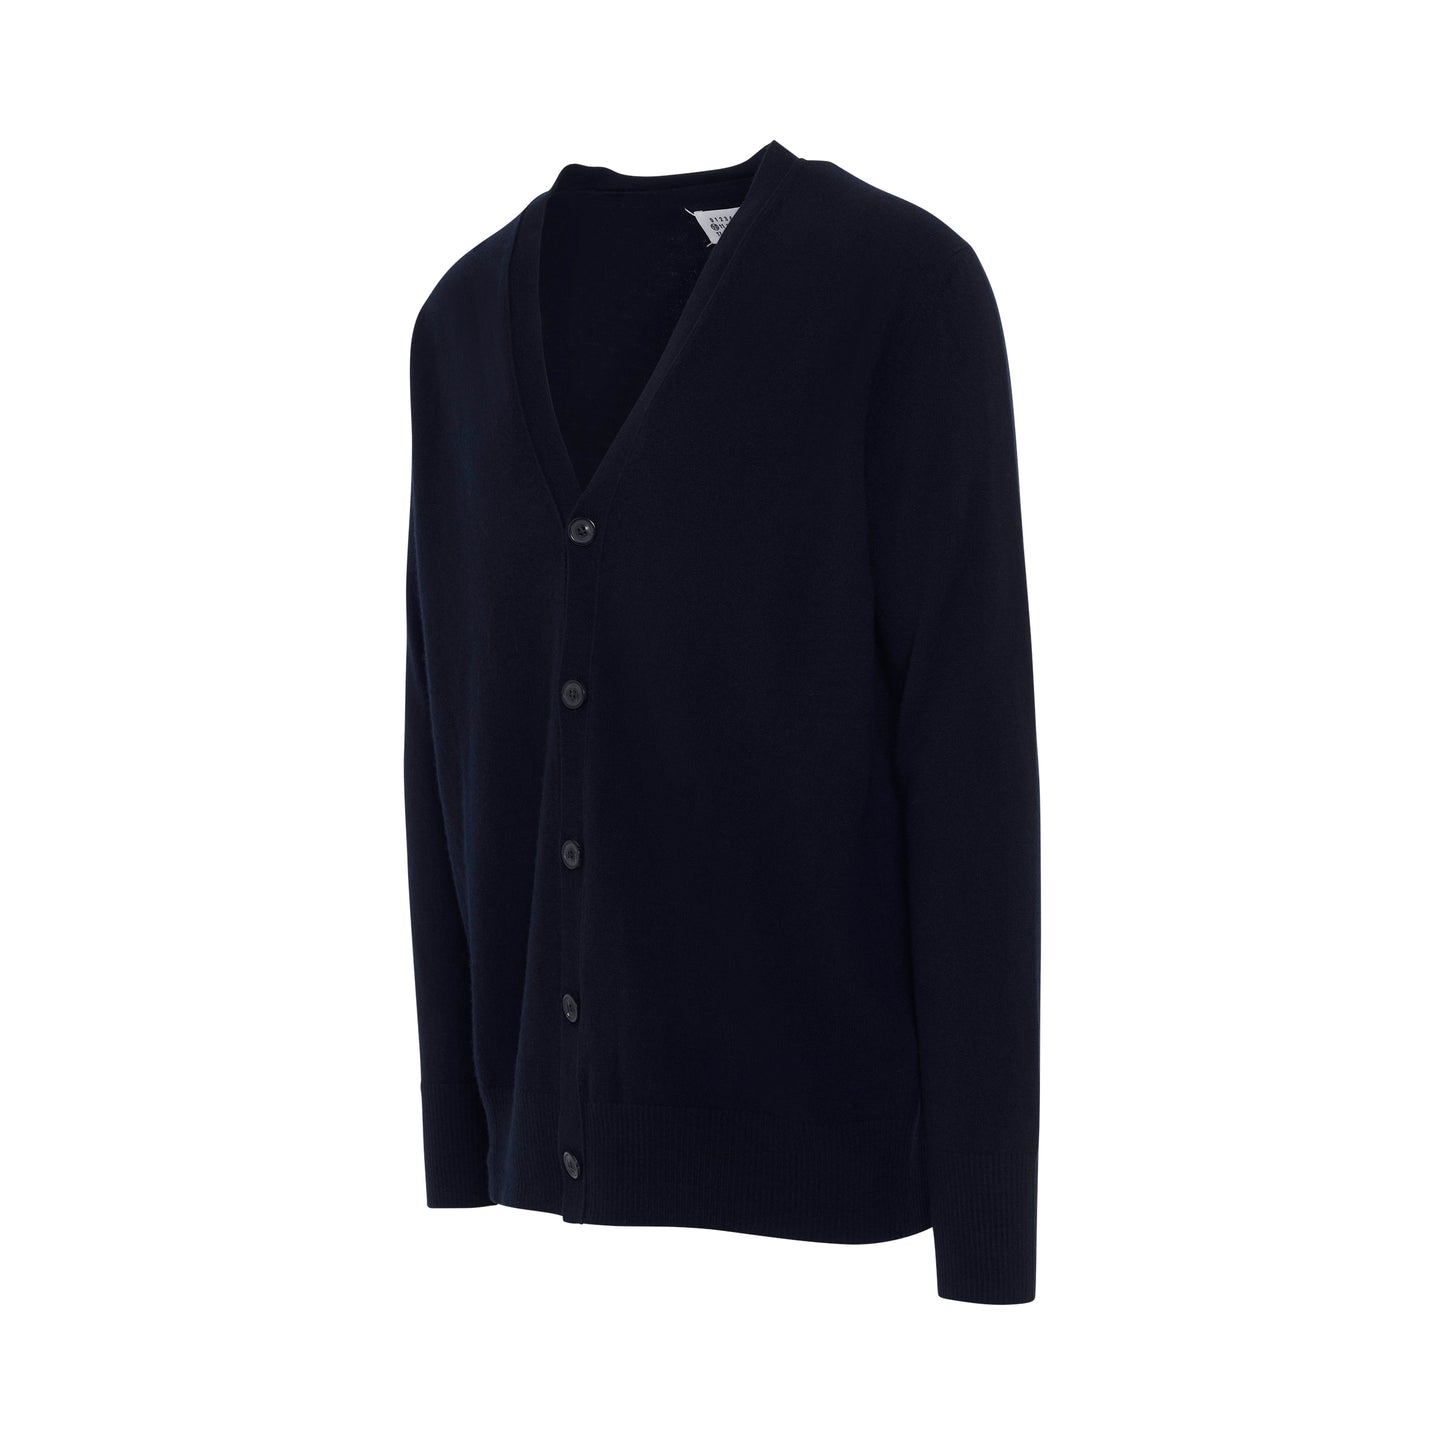 Long Sleeve Knit Pullover in Navy